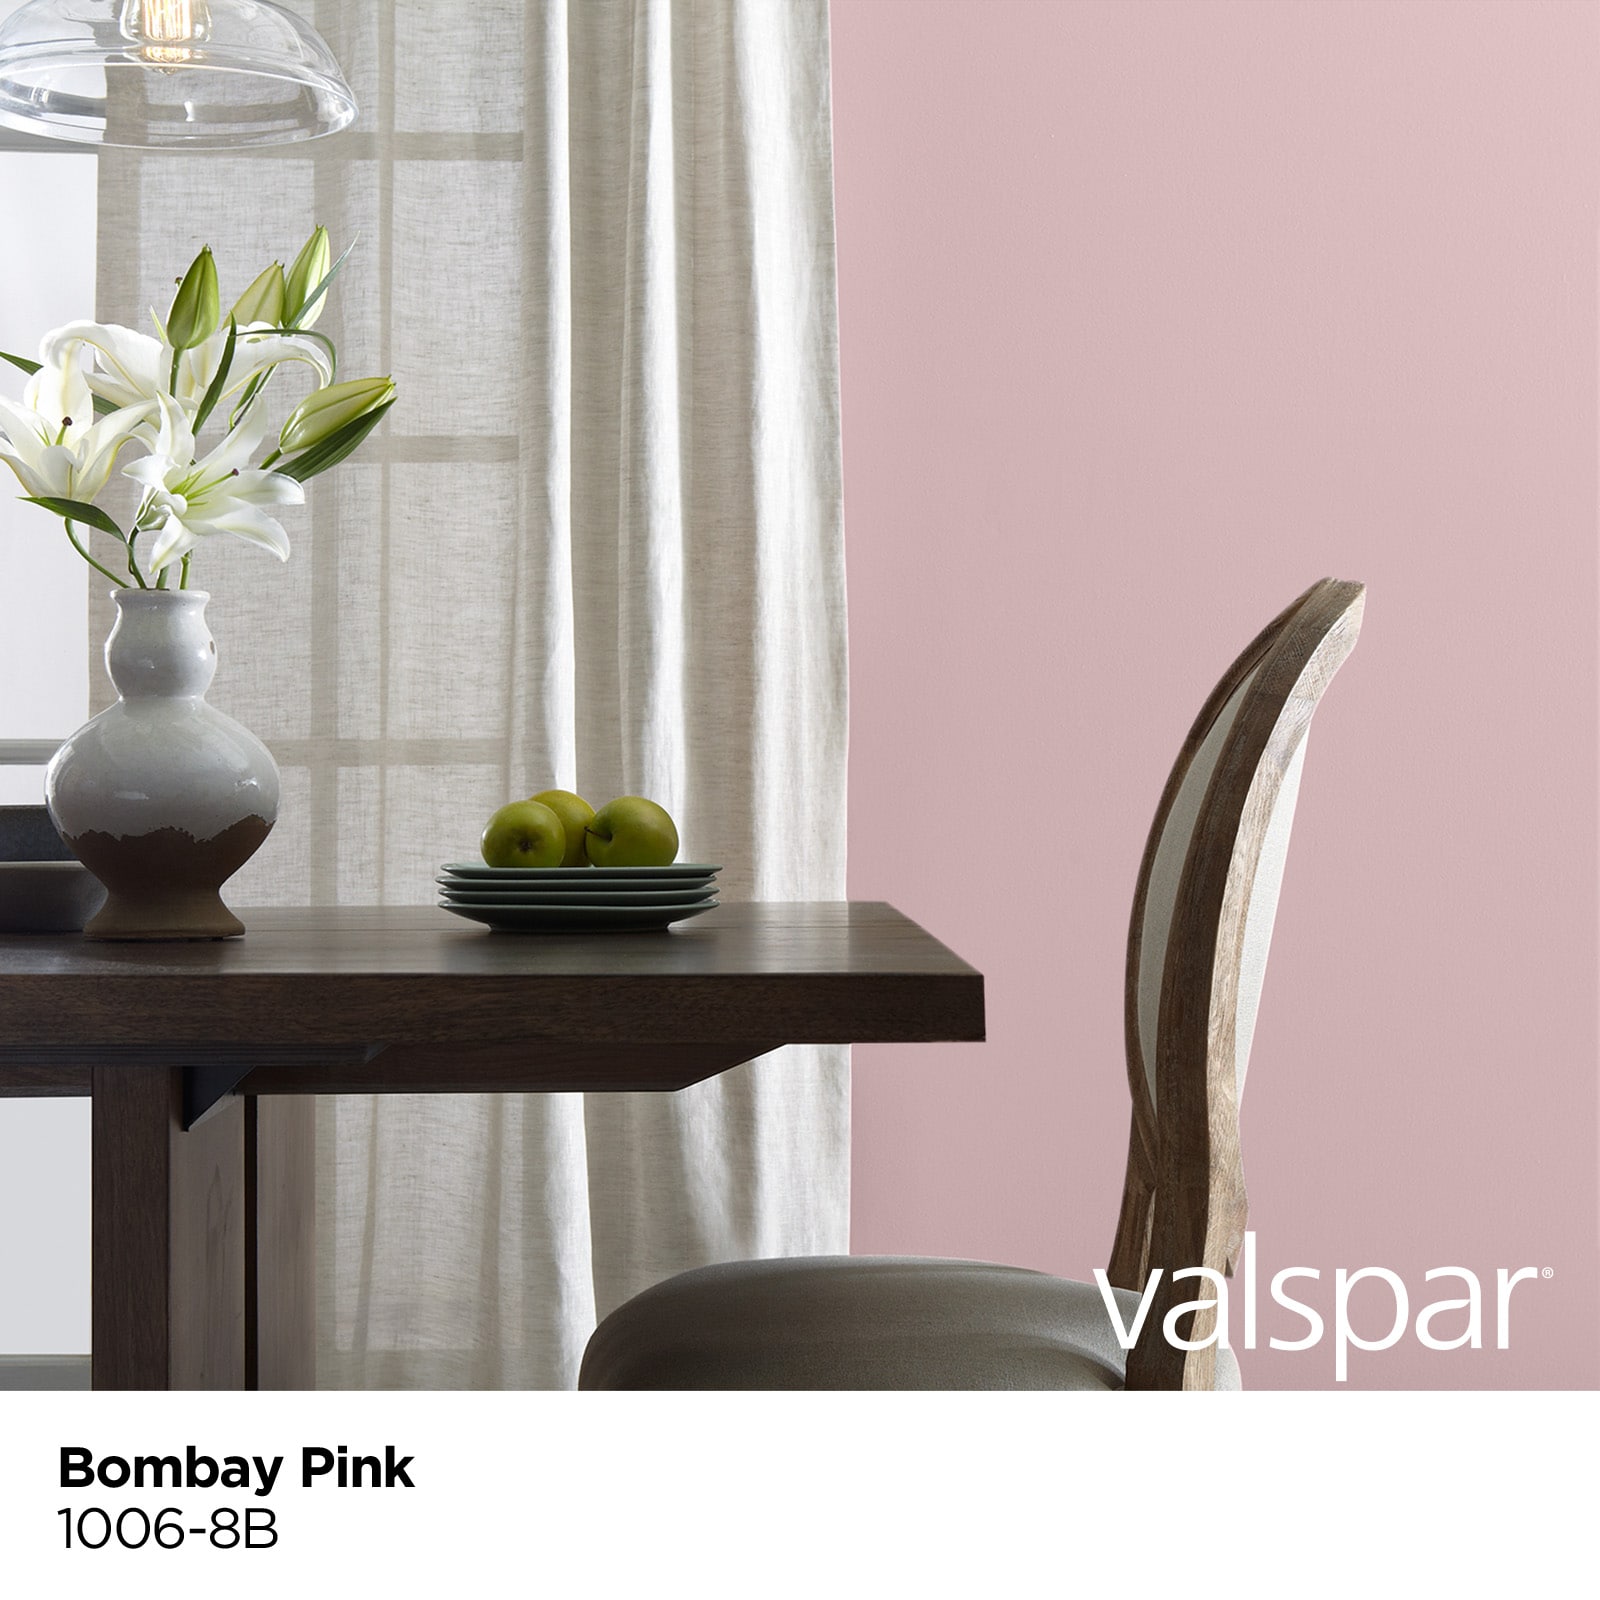 Valspar 4000 Semi-gloss Bombay Pink 1006-8b Latex Interior Paint (5-Gallon)  in the Interior Paint department at